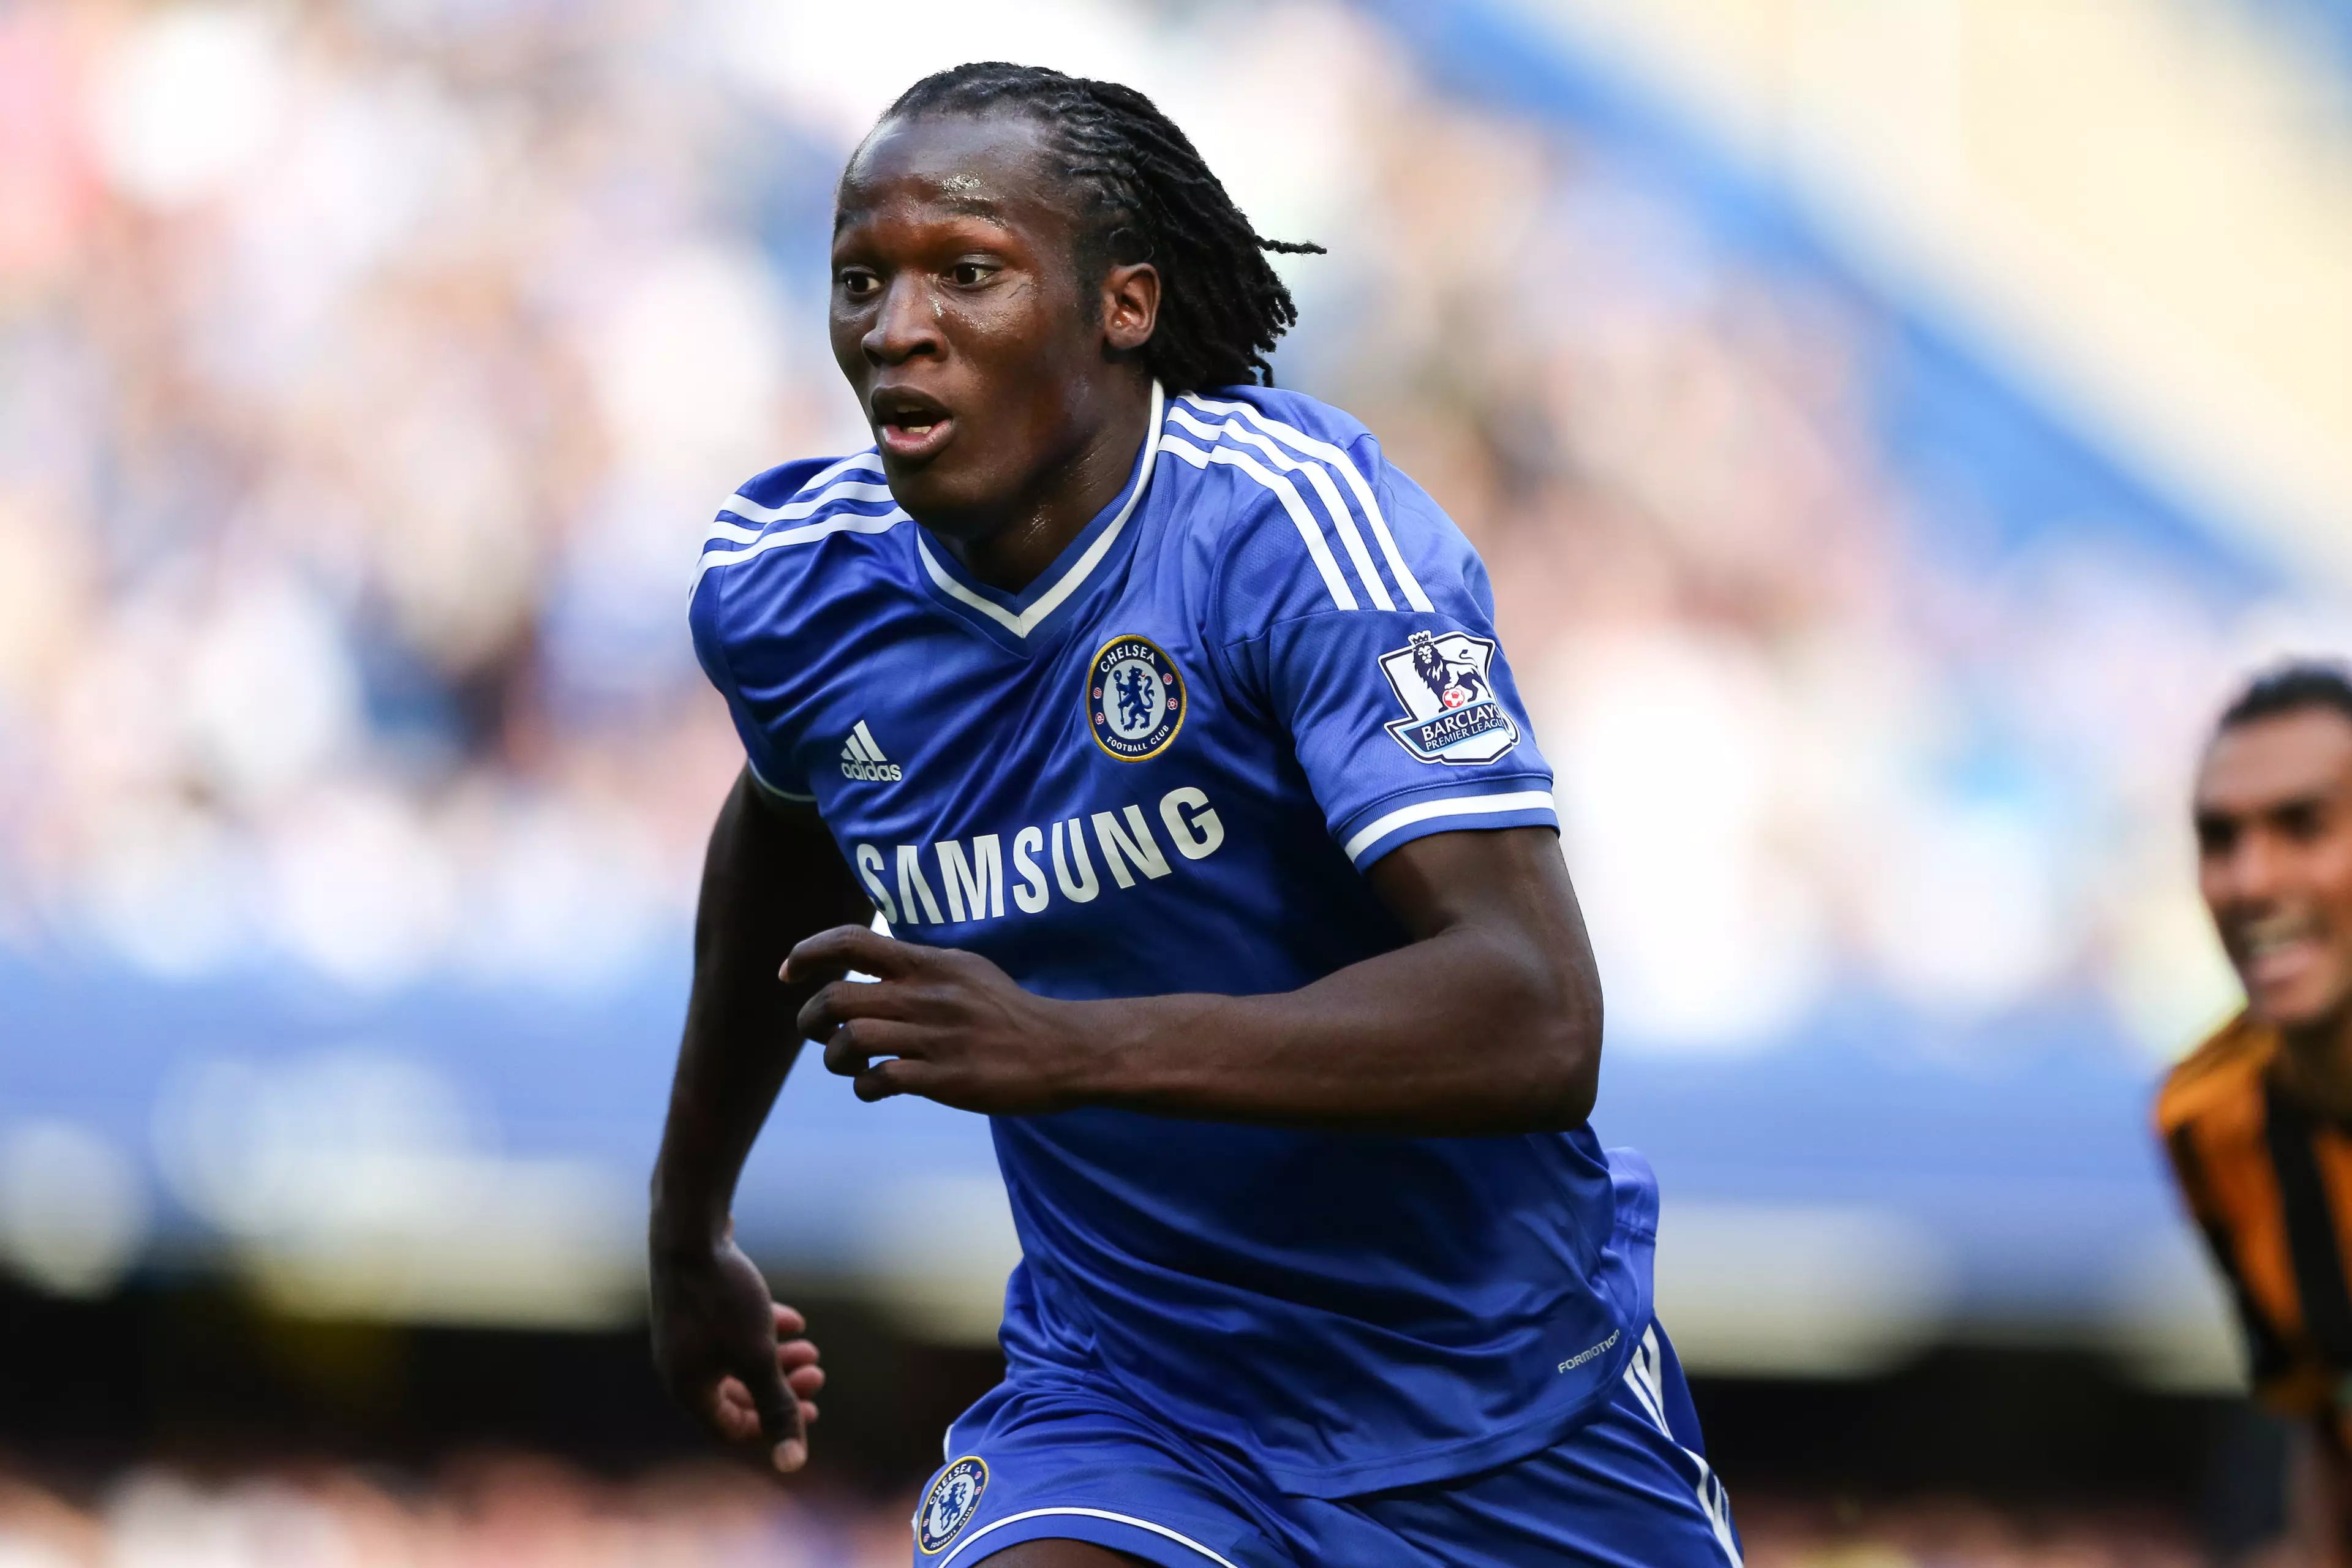 Lukaku is set to return to Chelsea after seven years away. Image: PA Images